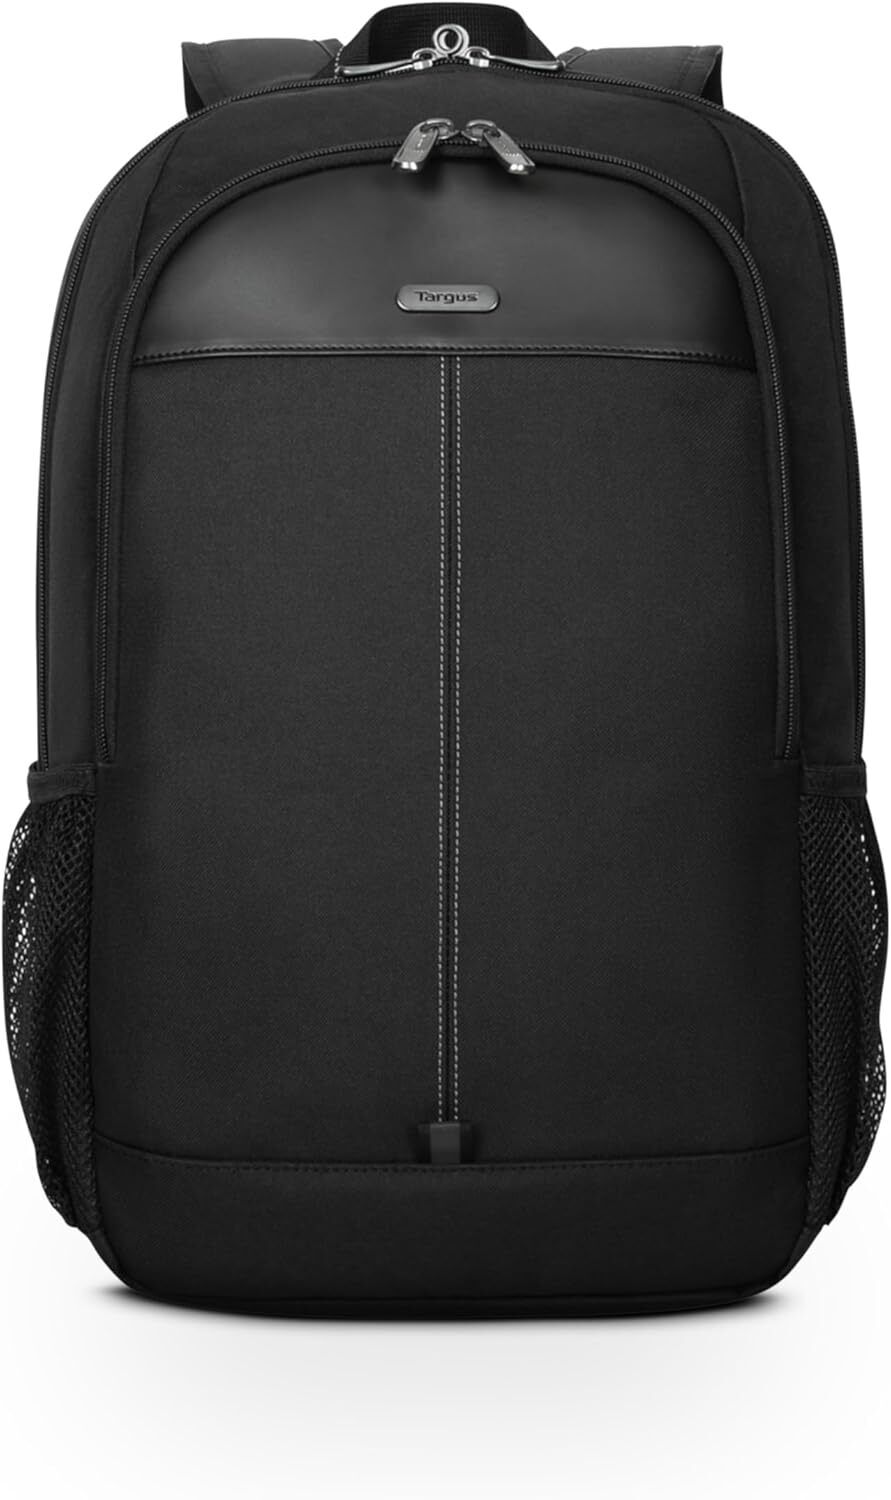 Targus 15-16 Inch Classic Laptop Backpack - Fits Most Laptops up to 16\